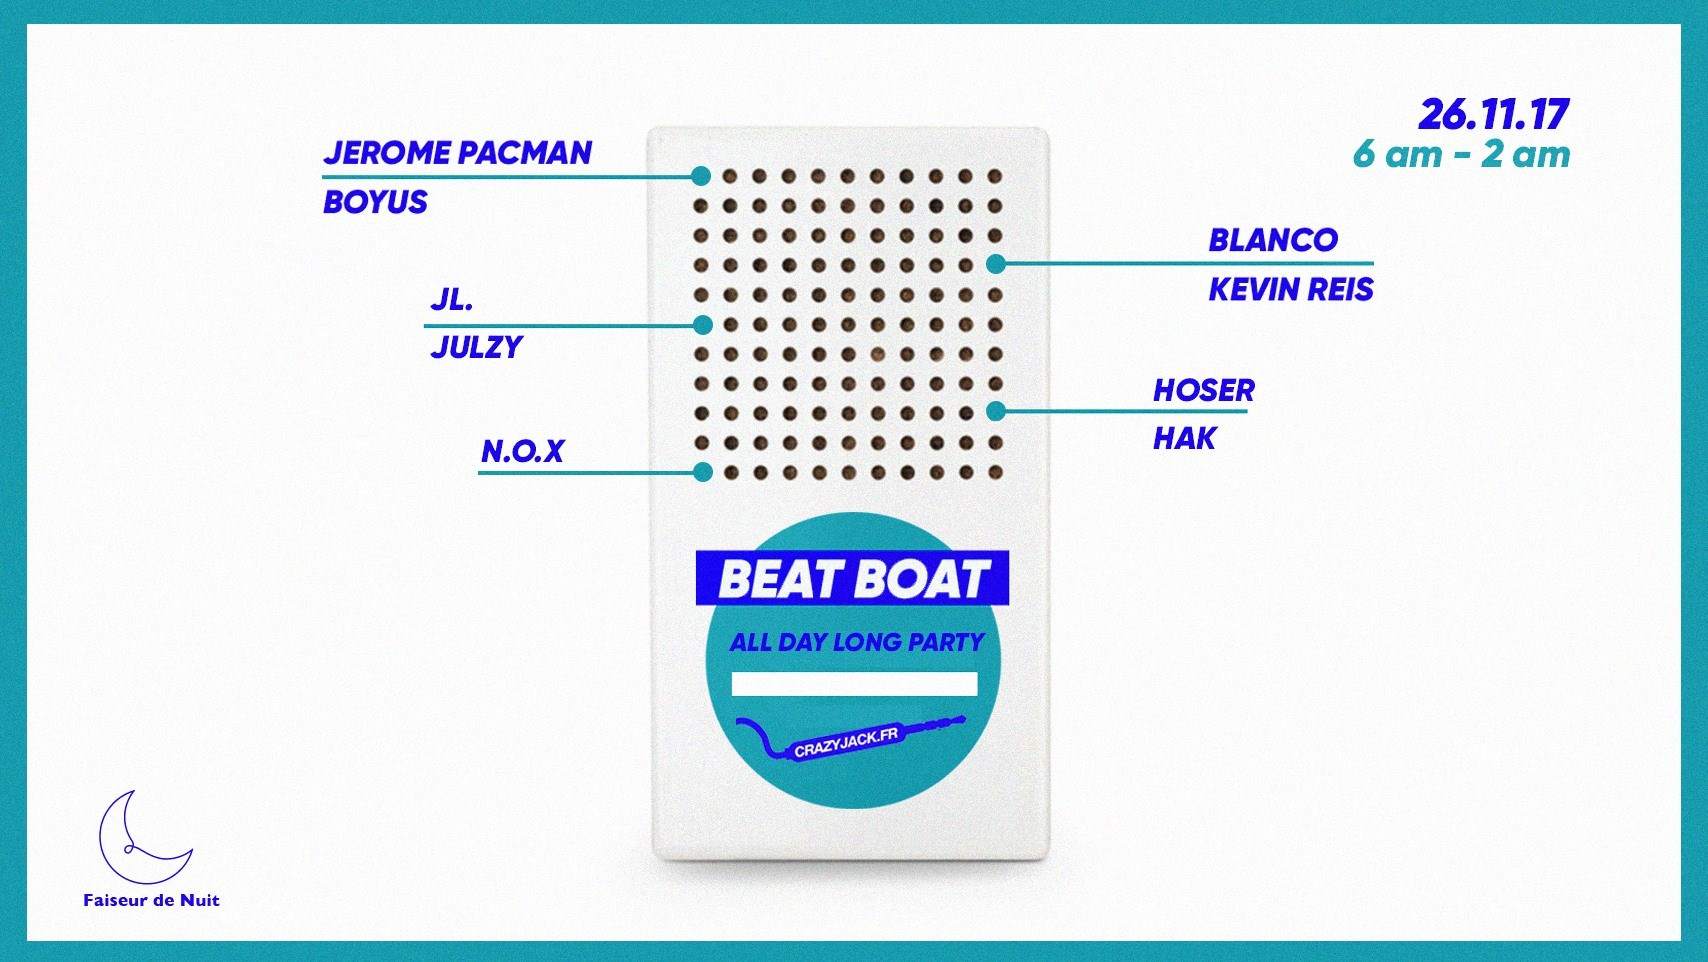 Beat Boat with CrazyJack (All Day Long Party) - Página frontal